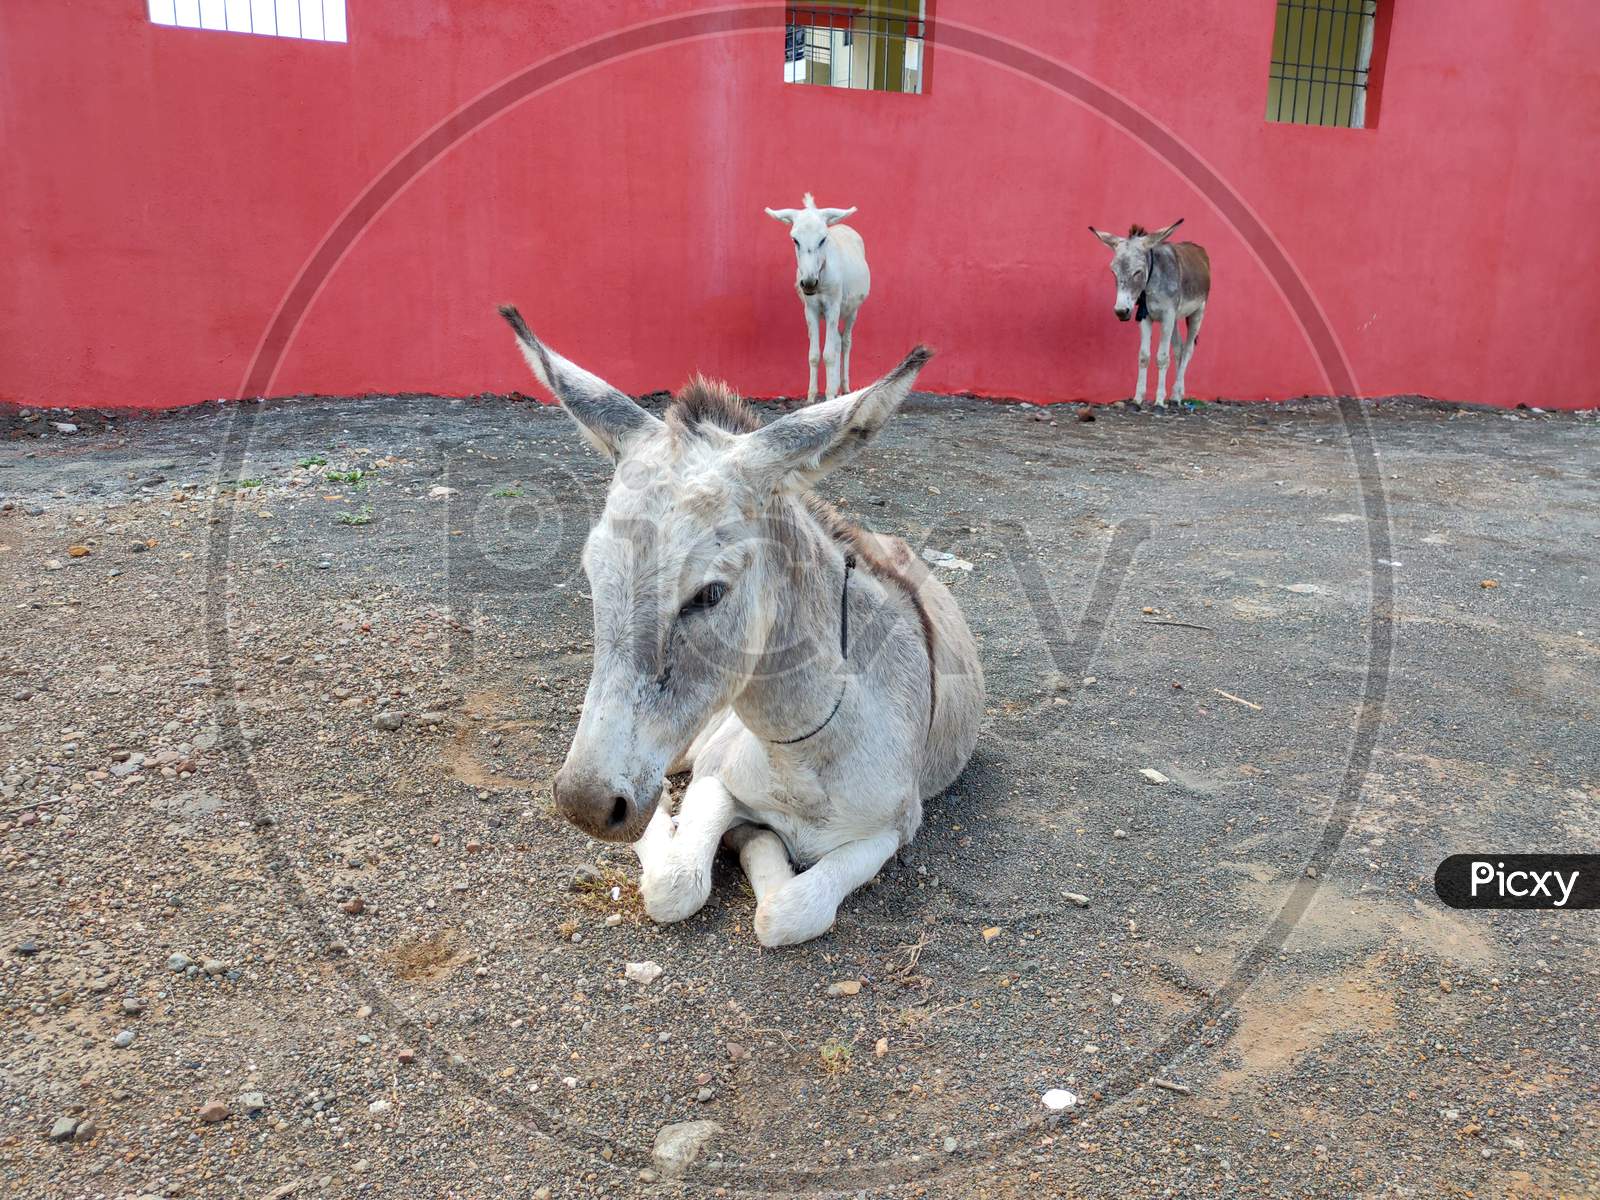 Close-Up Of Donkey On The Ground In The Village.